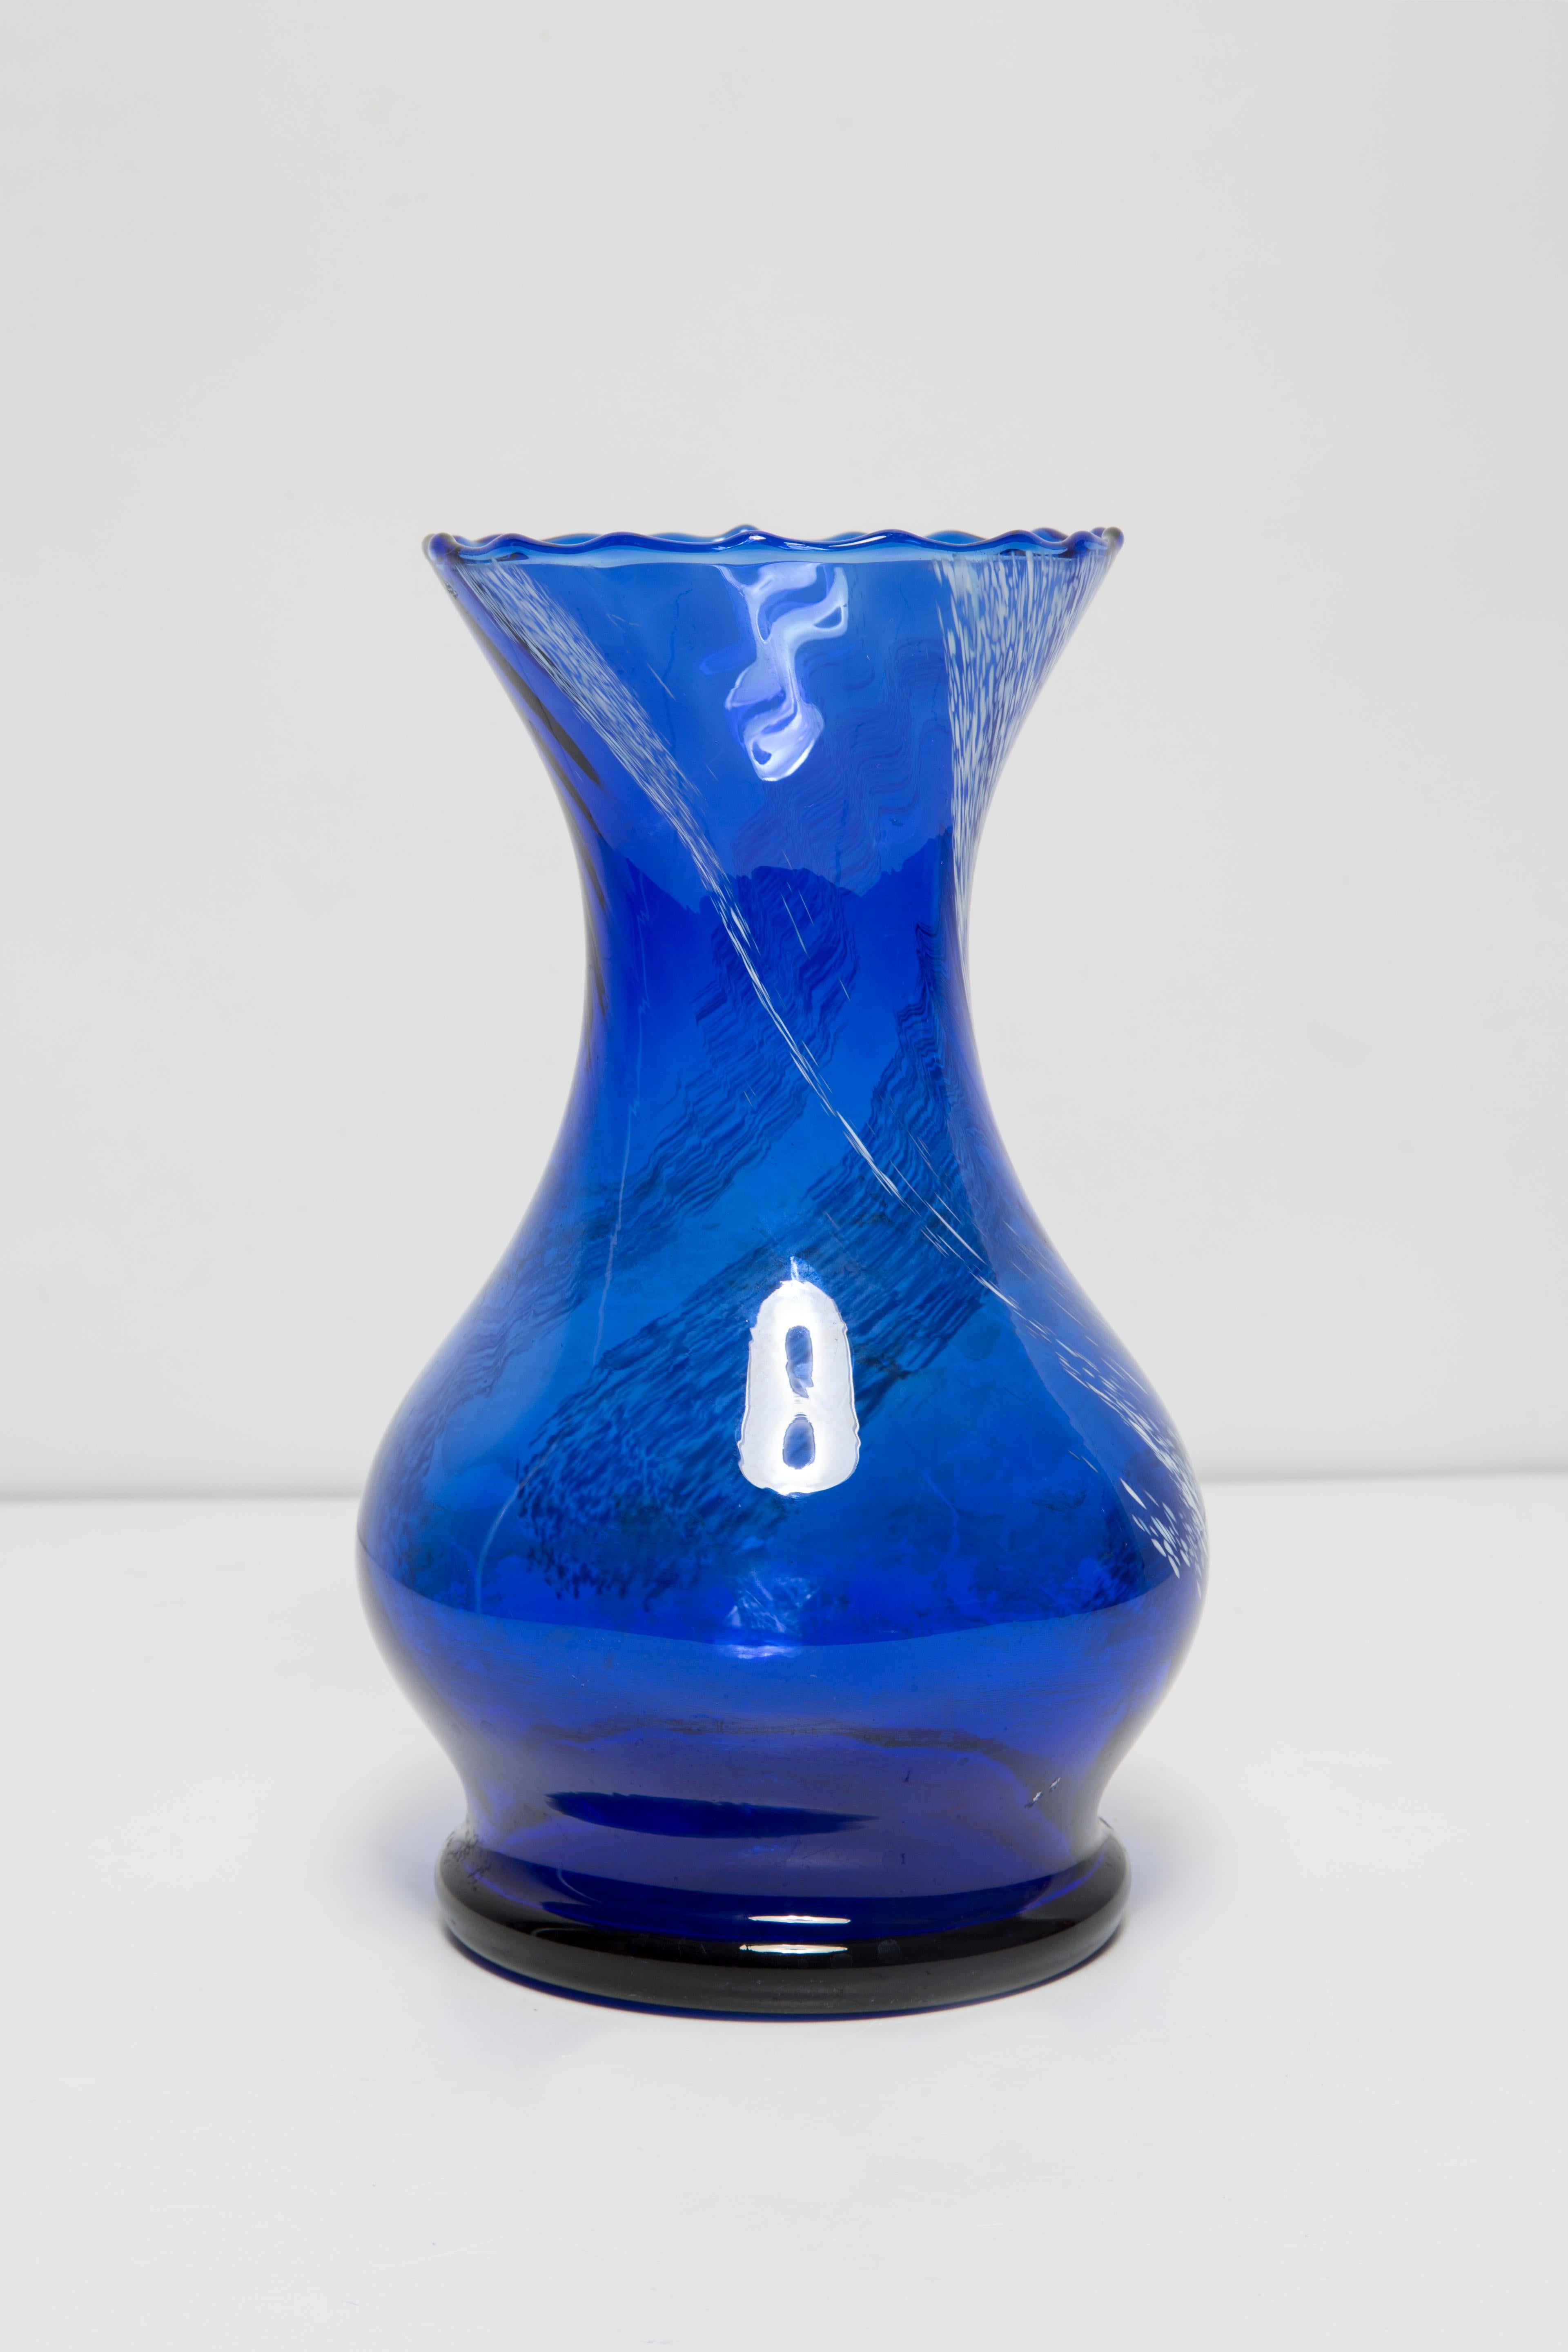 Mid Century Vintage Blue and White Artistic Glass Vase, Europe, 1970s For Sale 1